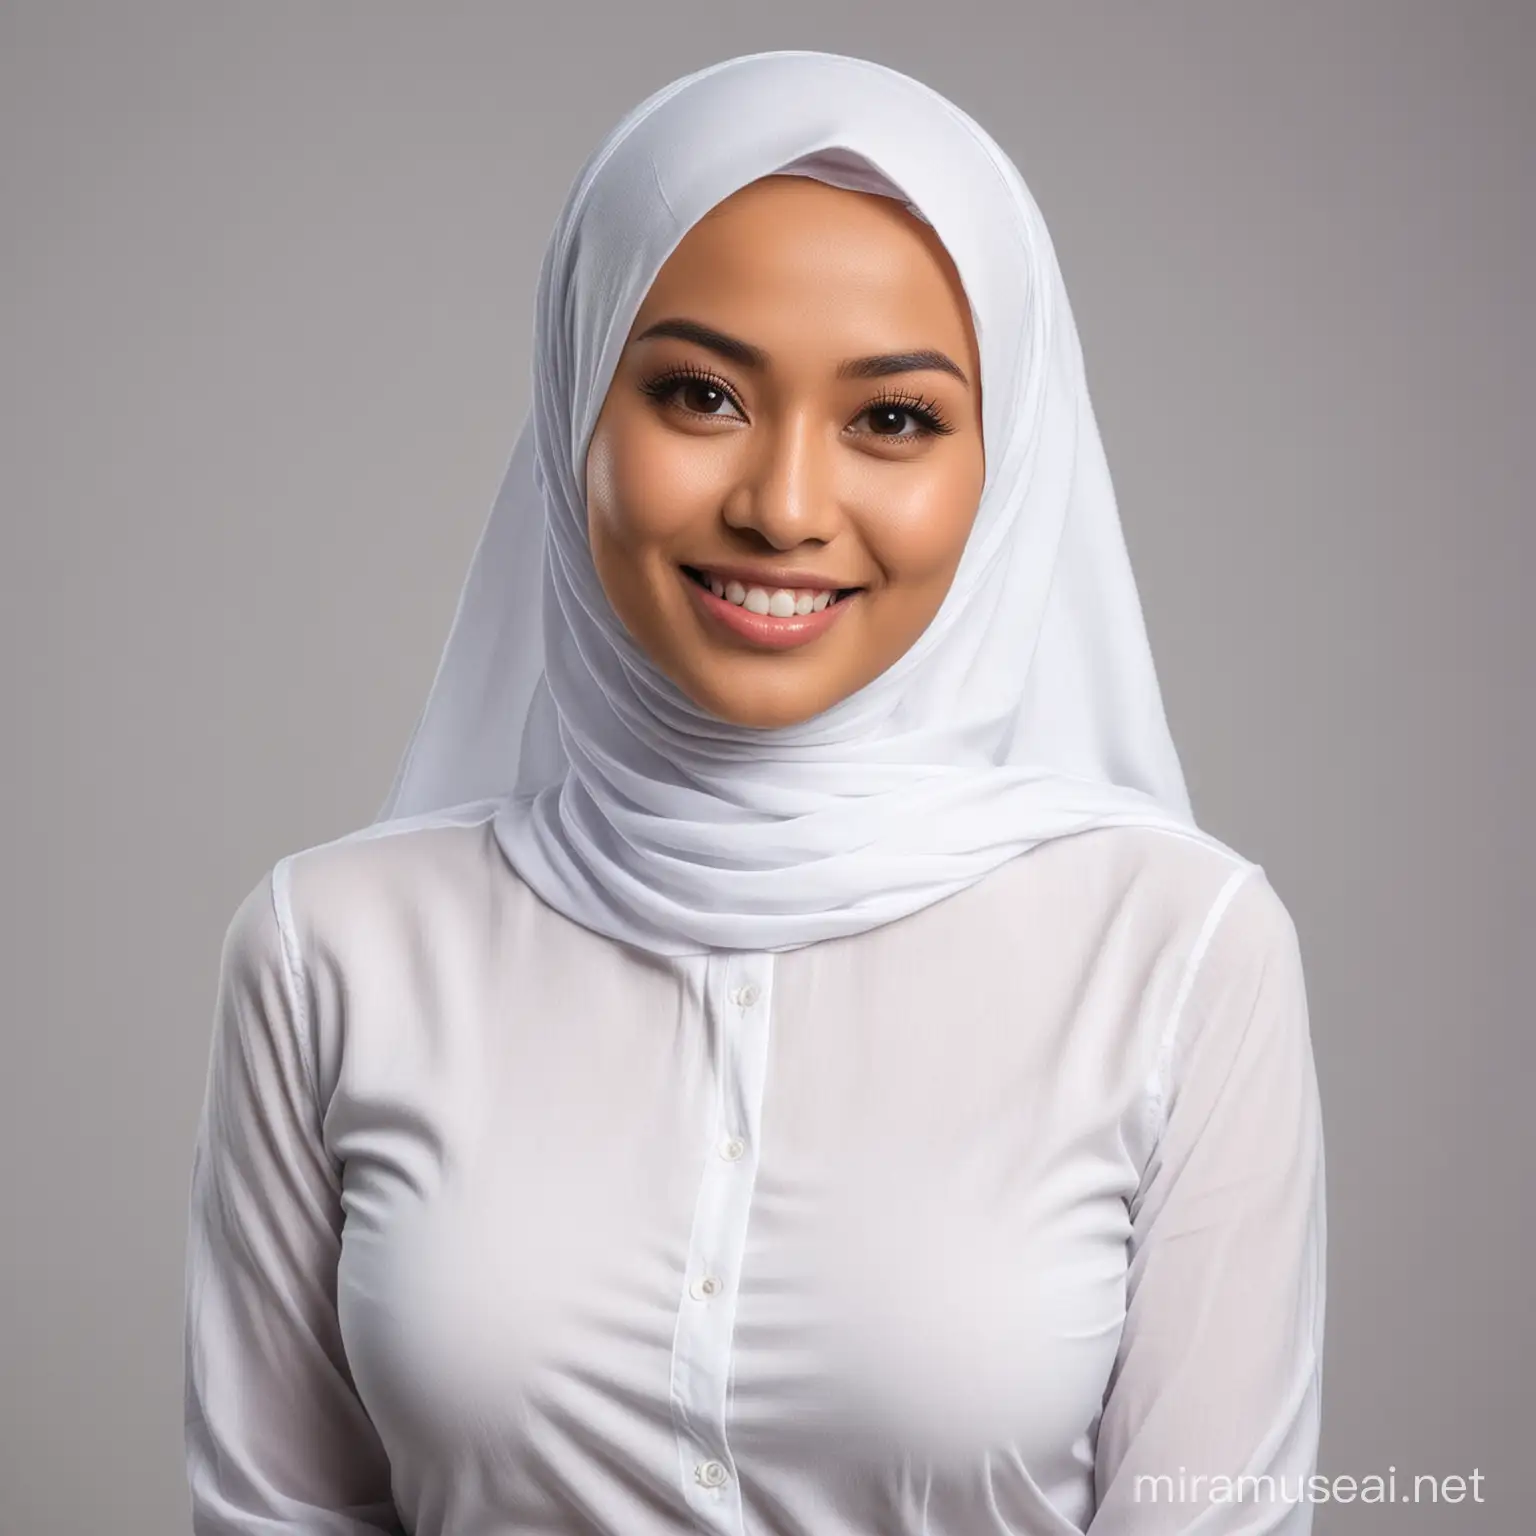 Traditional Malay Woman Posing in Hijab Authentic Village Beauty Displaying Confidence